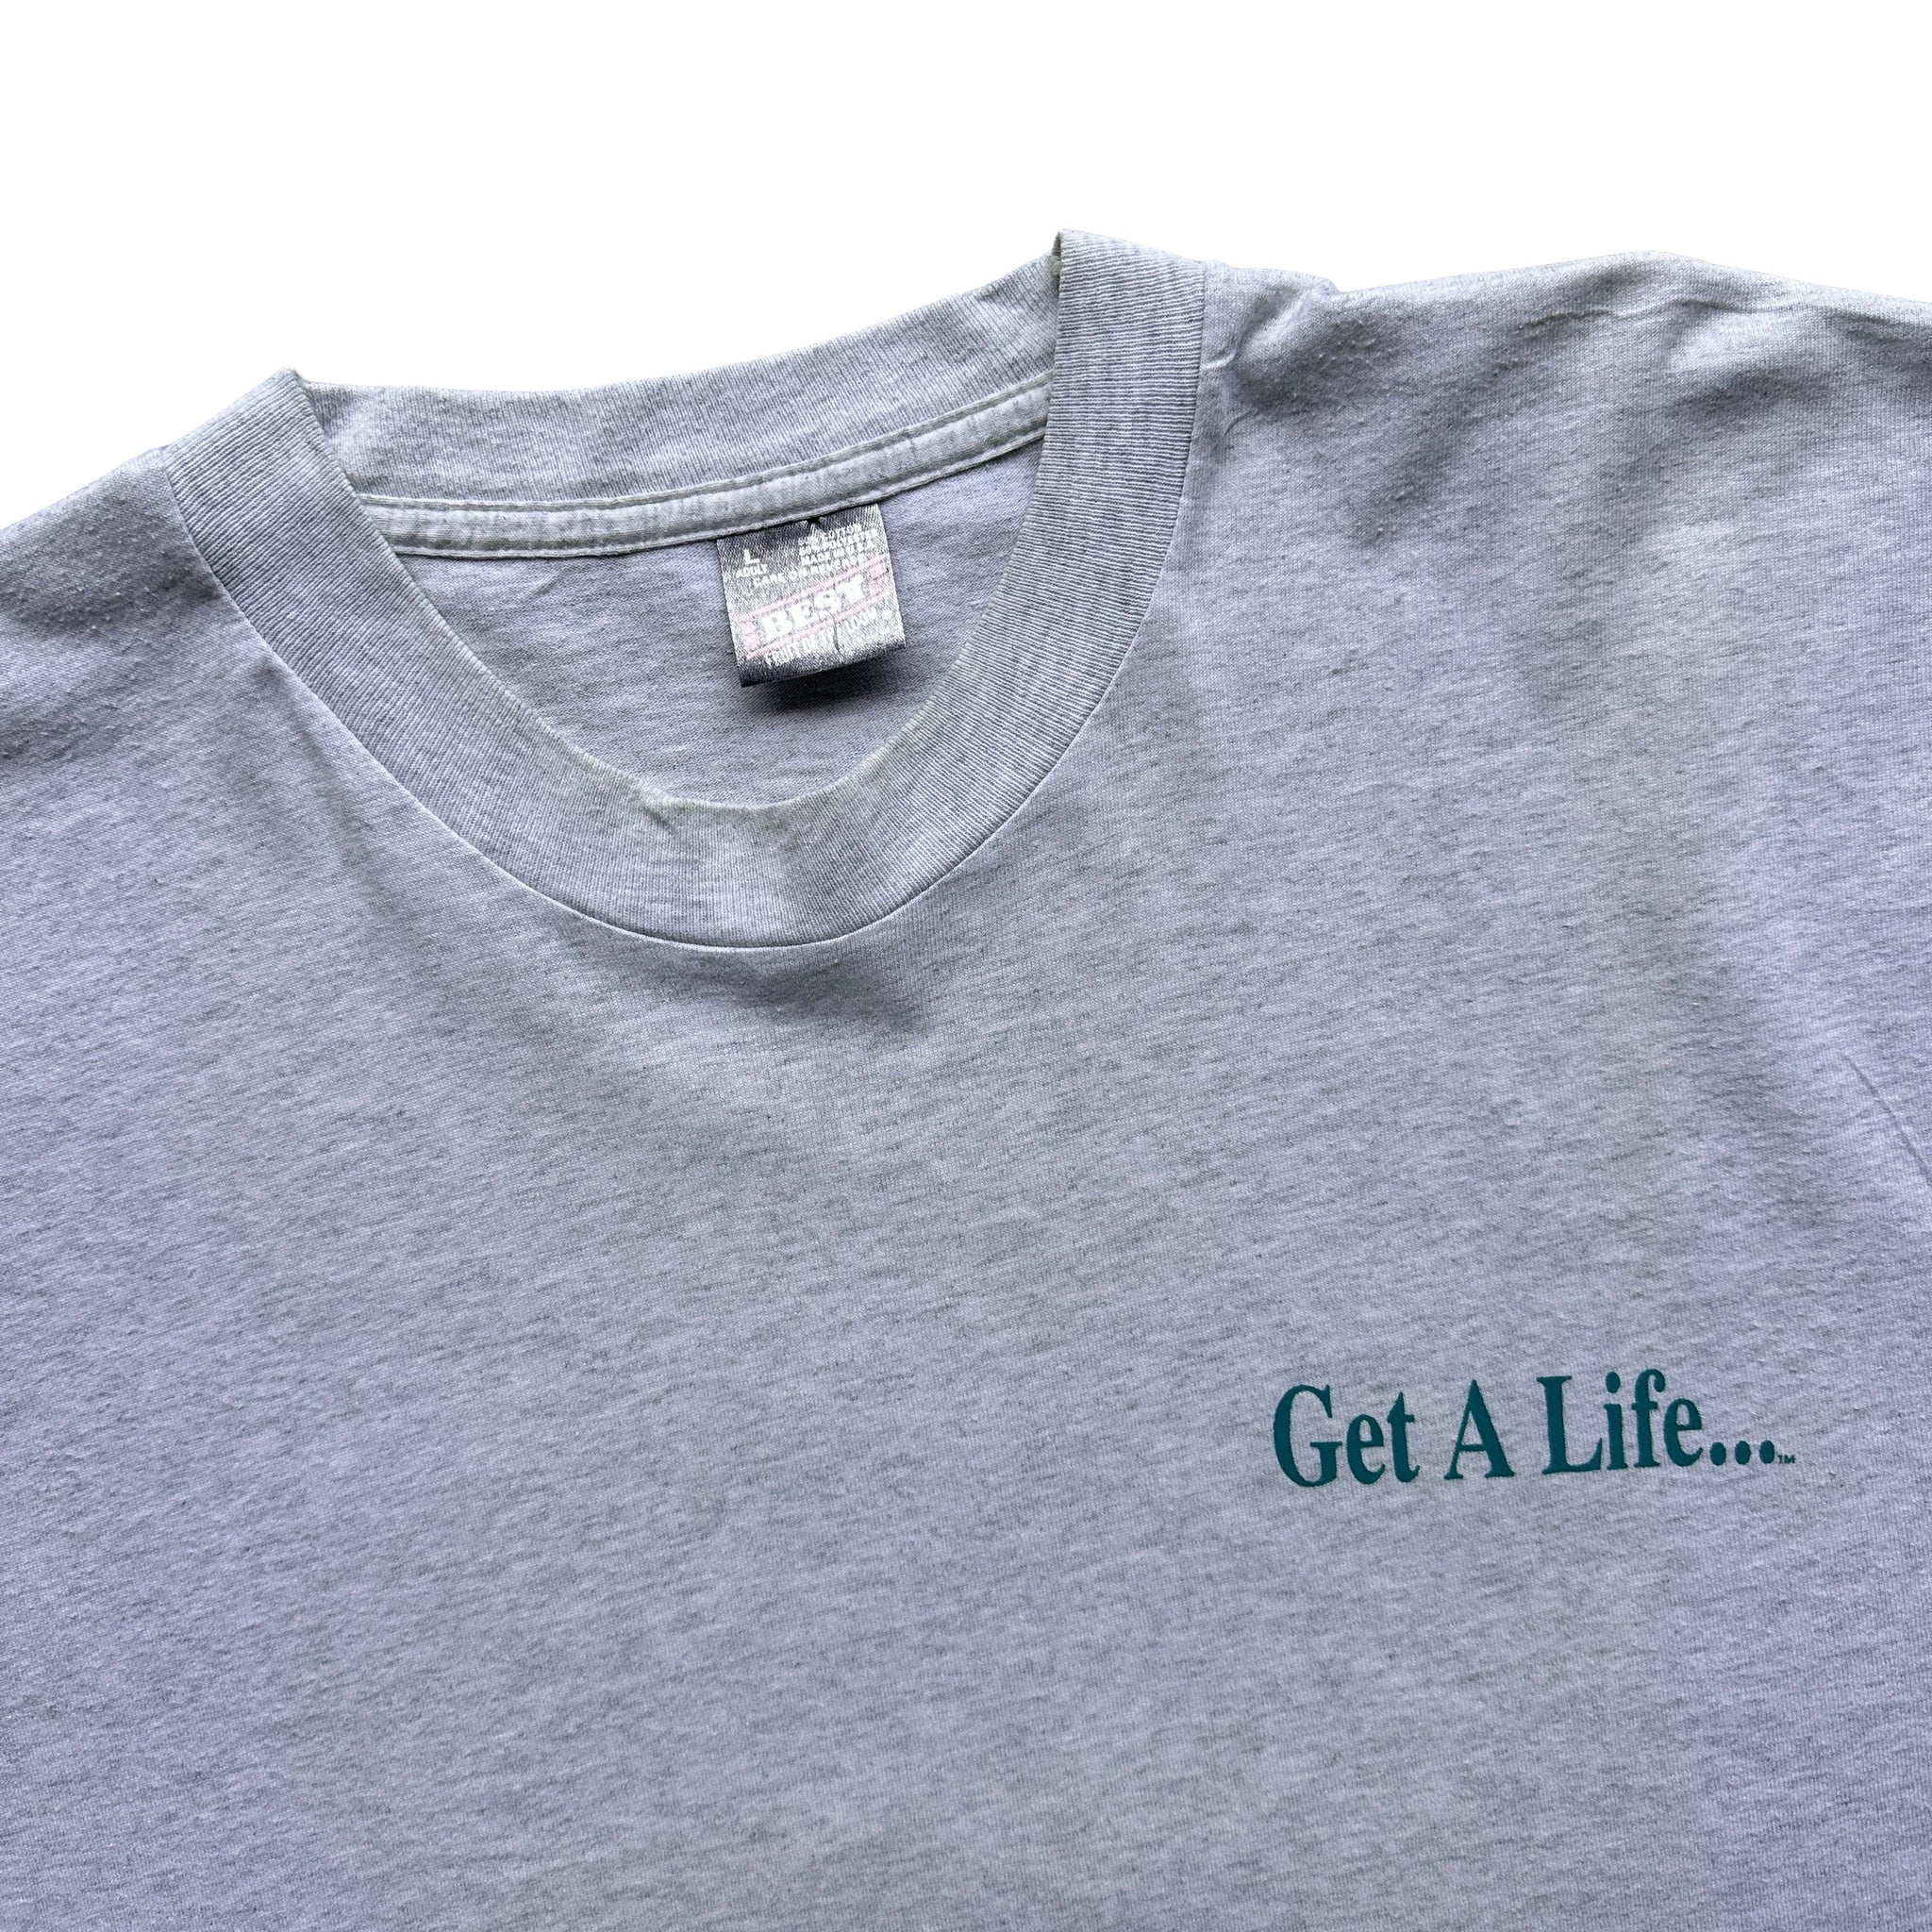 Get a life fishing tee large